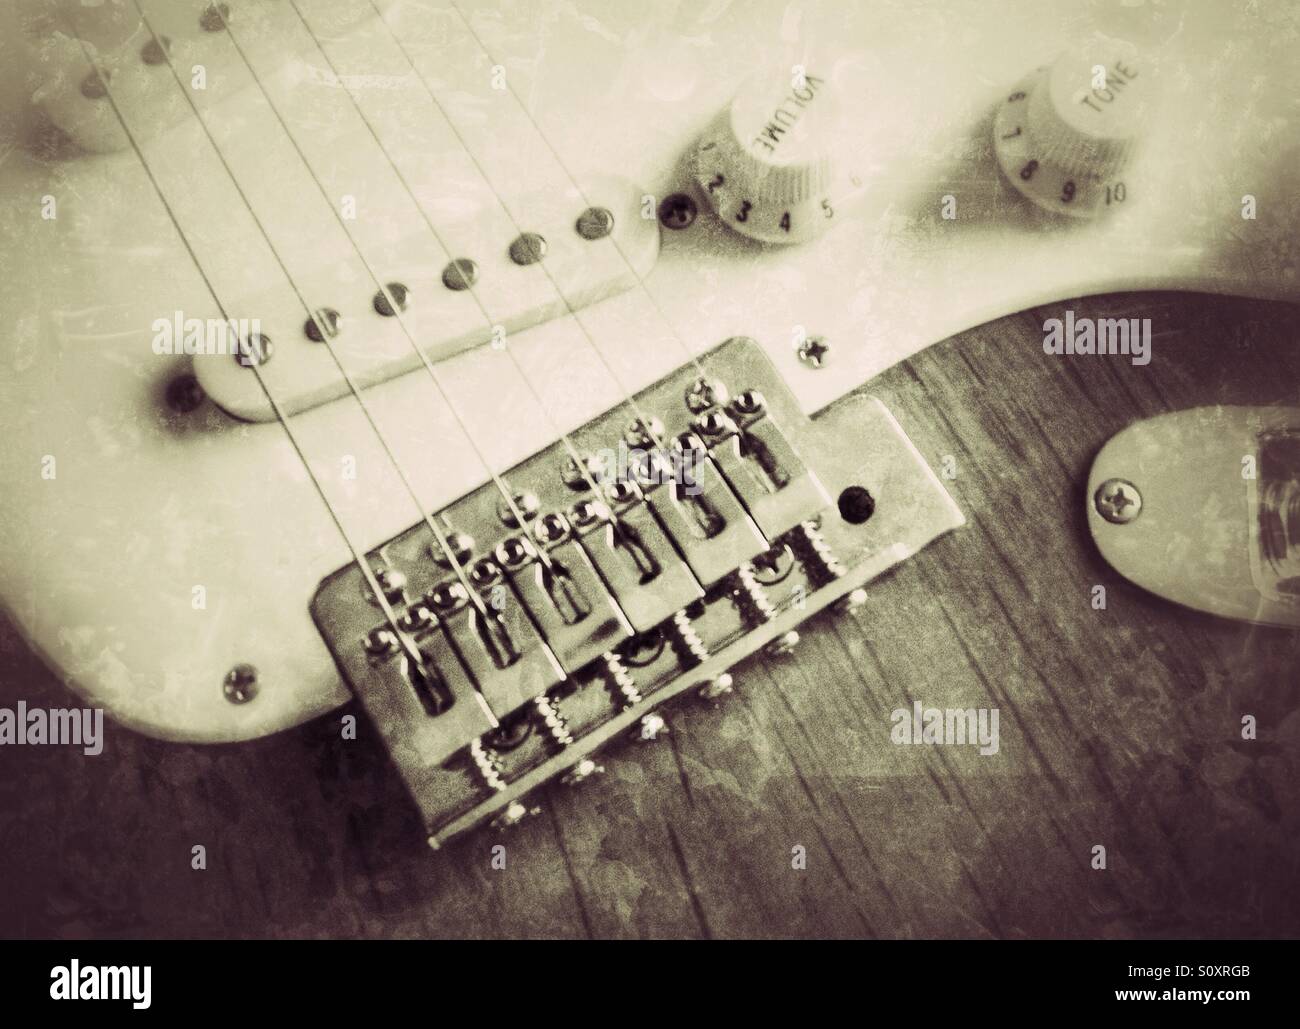 Electric guitar in black and white colors Stock Photo